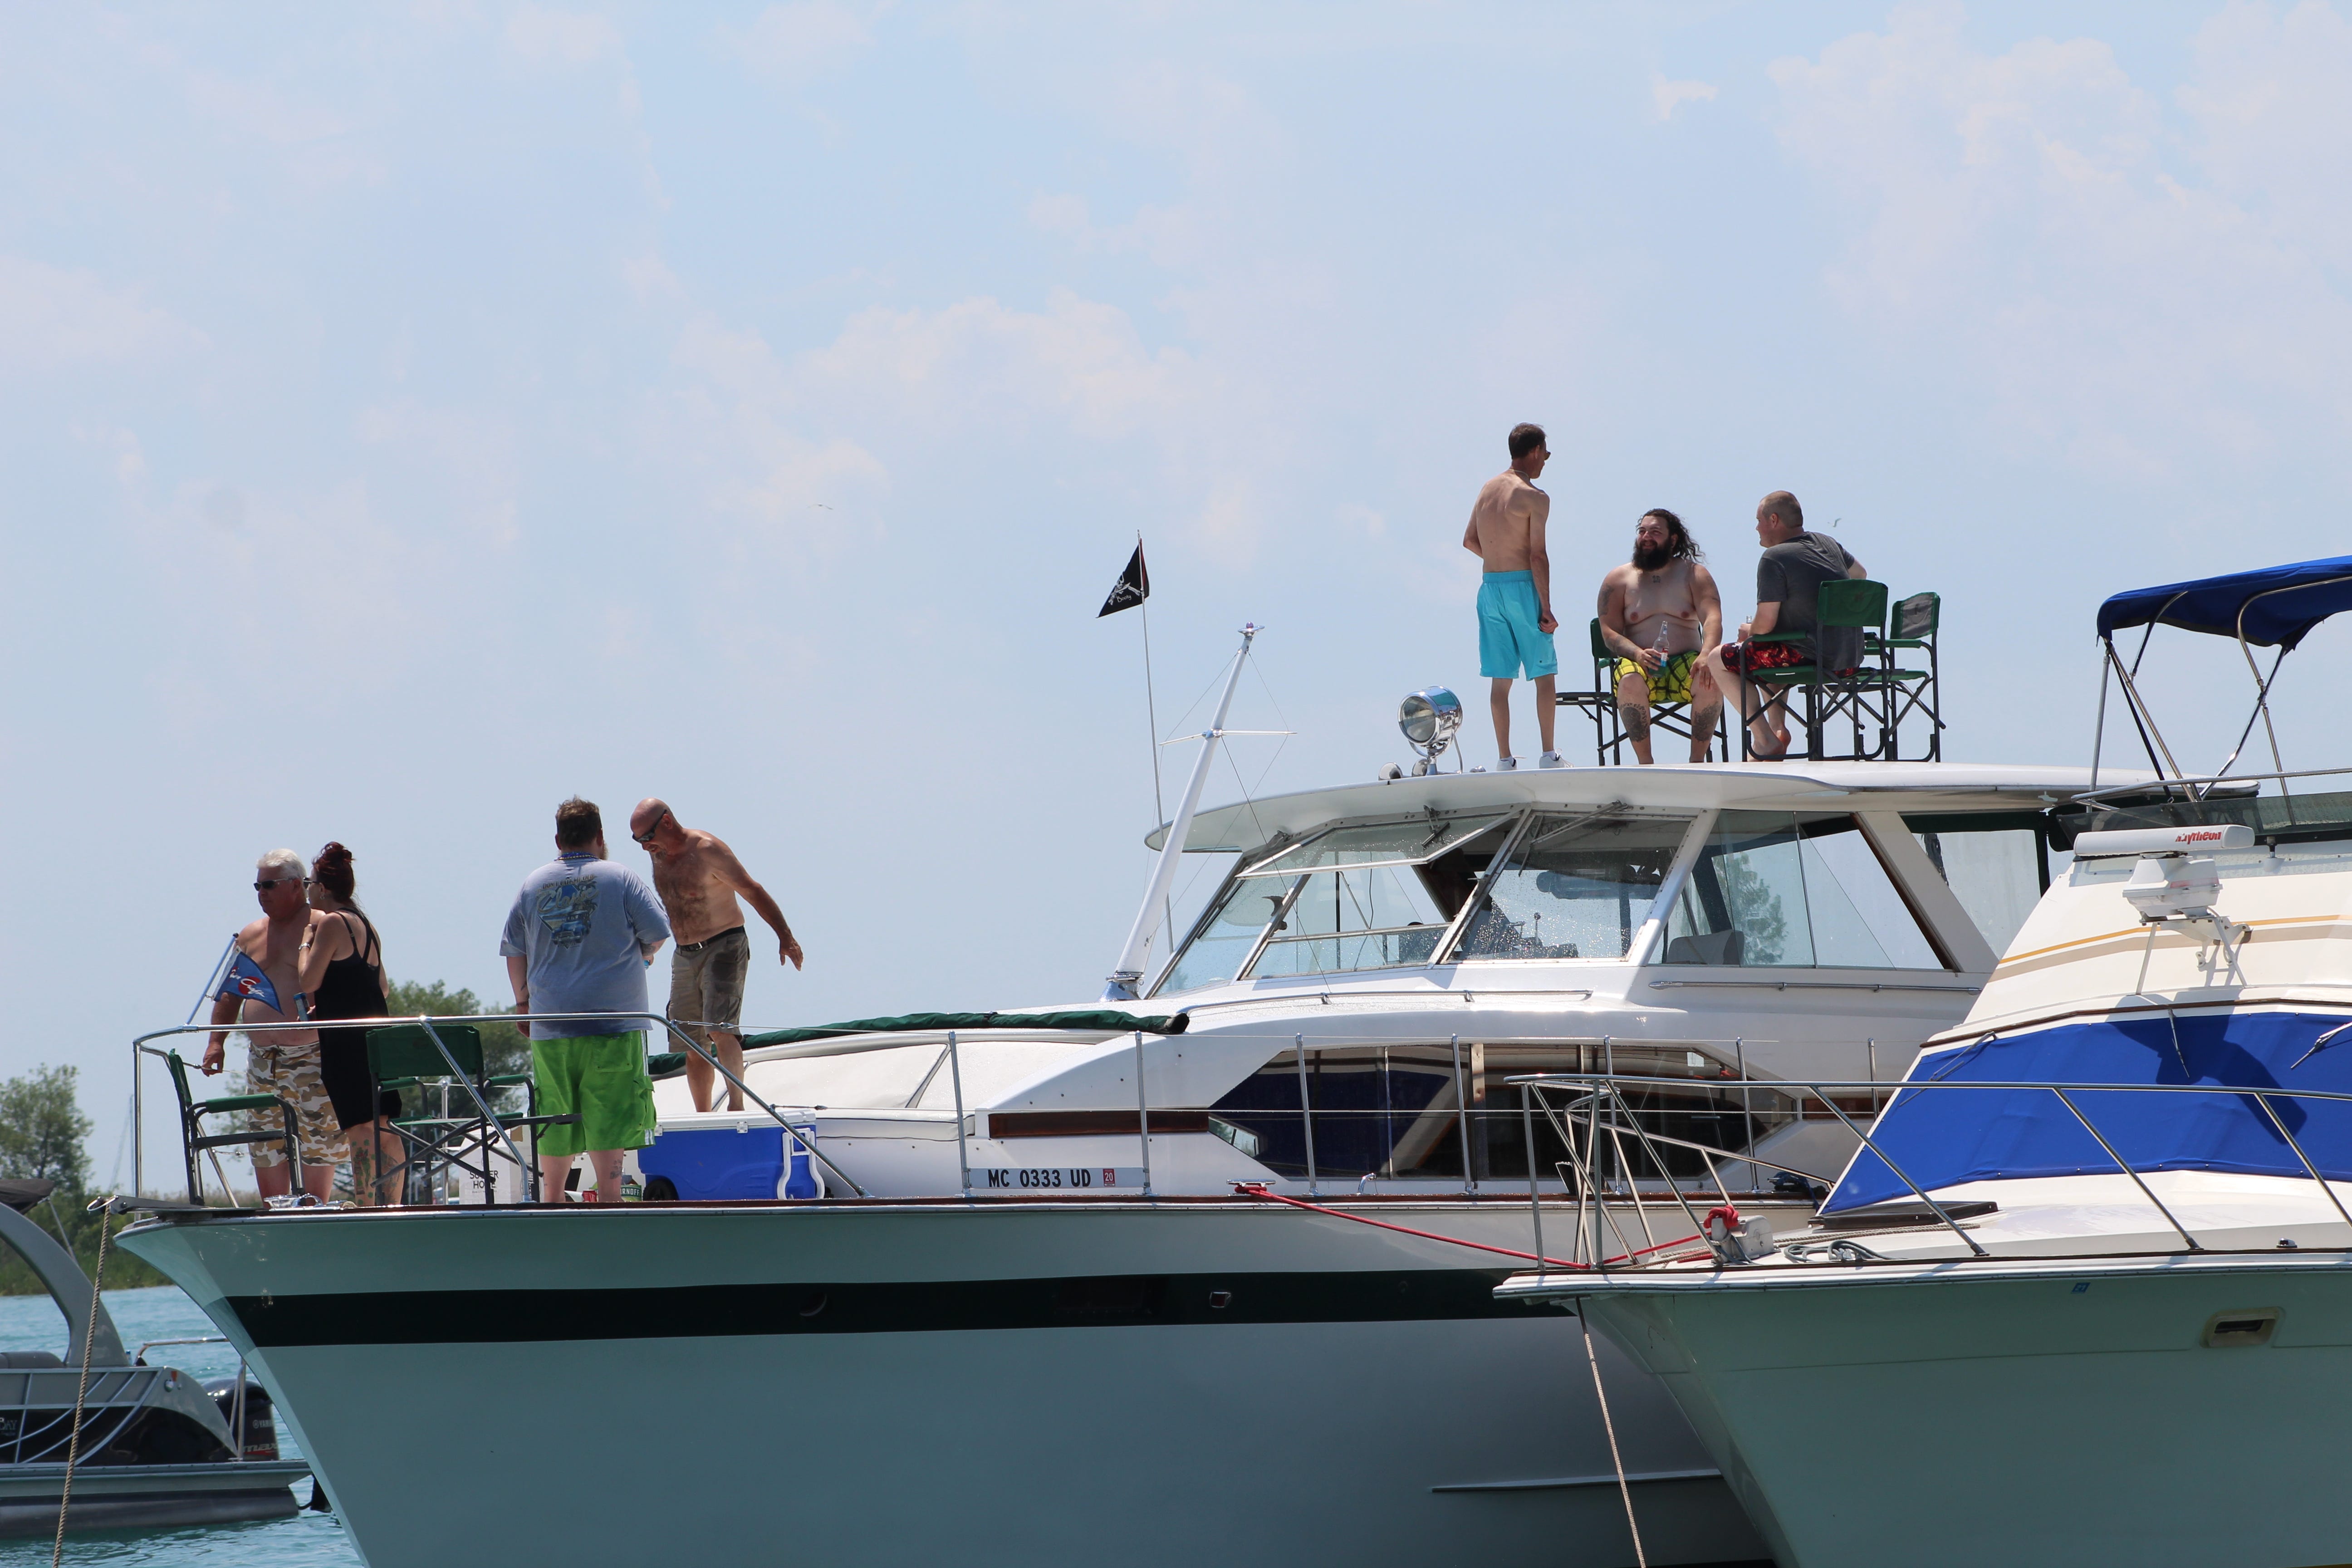 Jobbie Nooner revelers hang out on pleasure craft boats around Gull Island on Lake St. Clair, Friday, June 28, 2019.